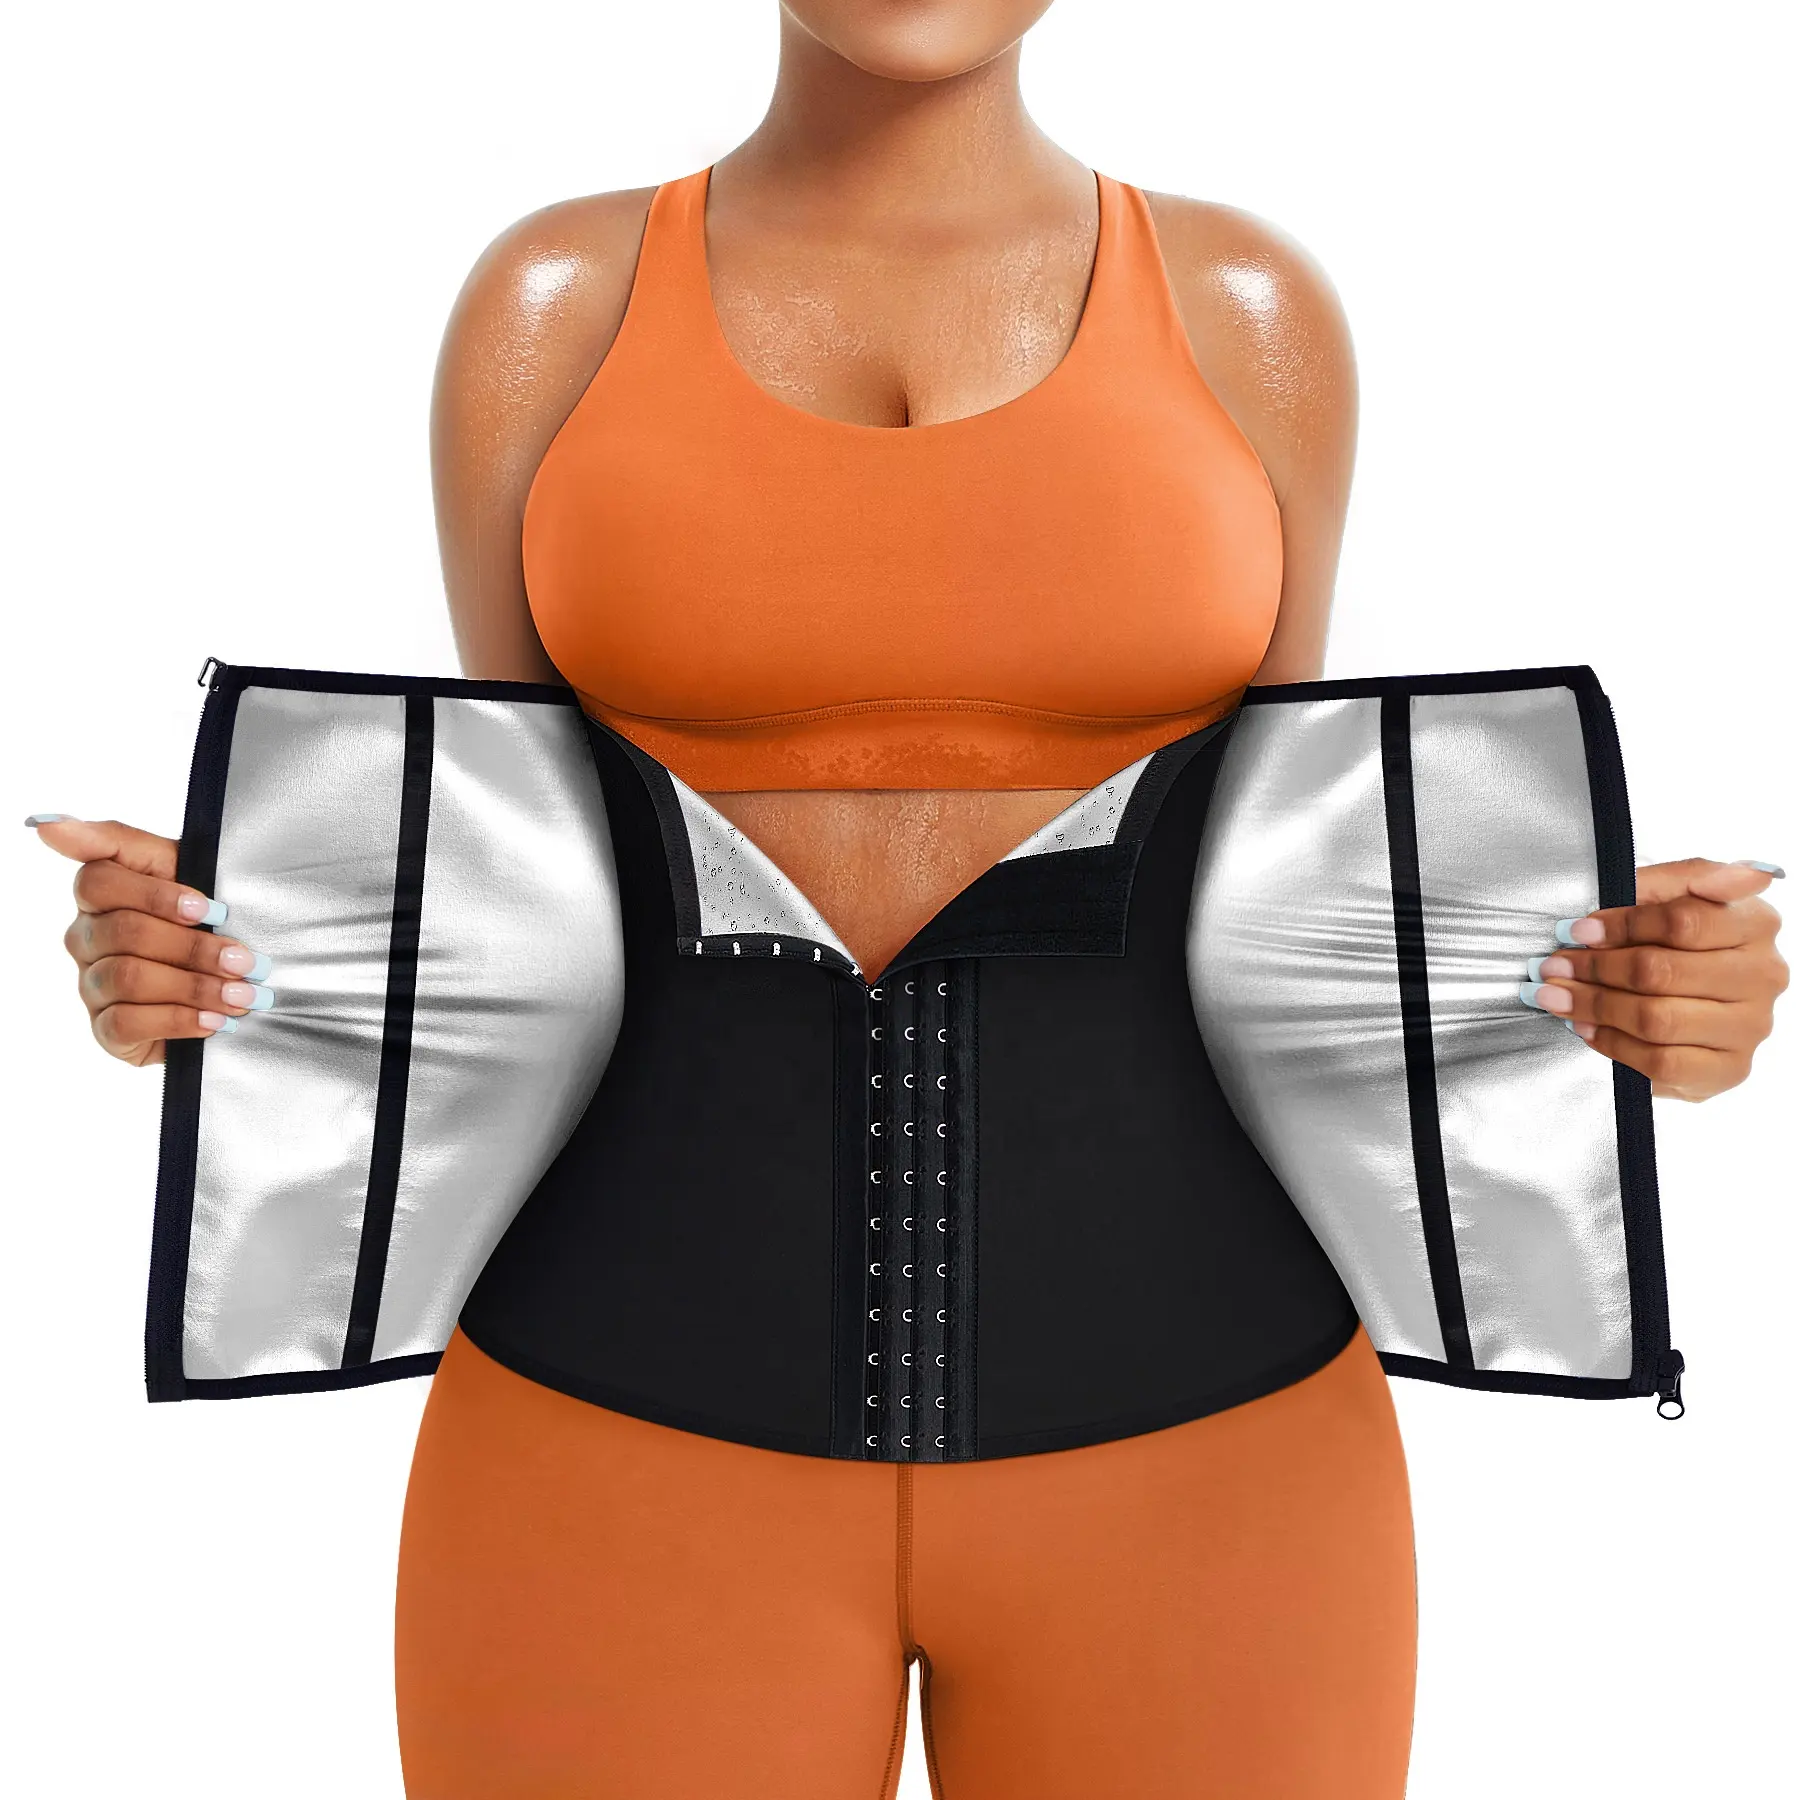 Trending Custom Logo Waist Trainers for Women Belly Fat Sauna Suit Waist Trimmer Sweat Bands for Hourglass Body Shaping